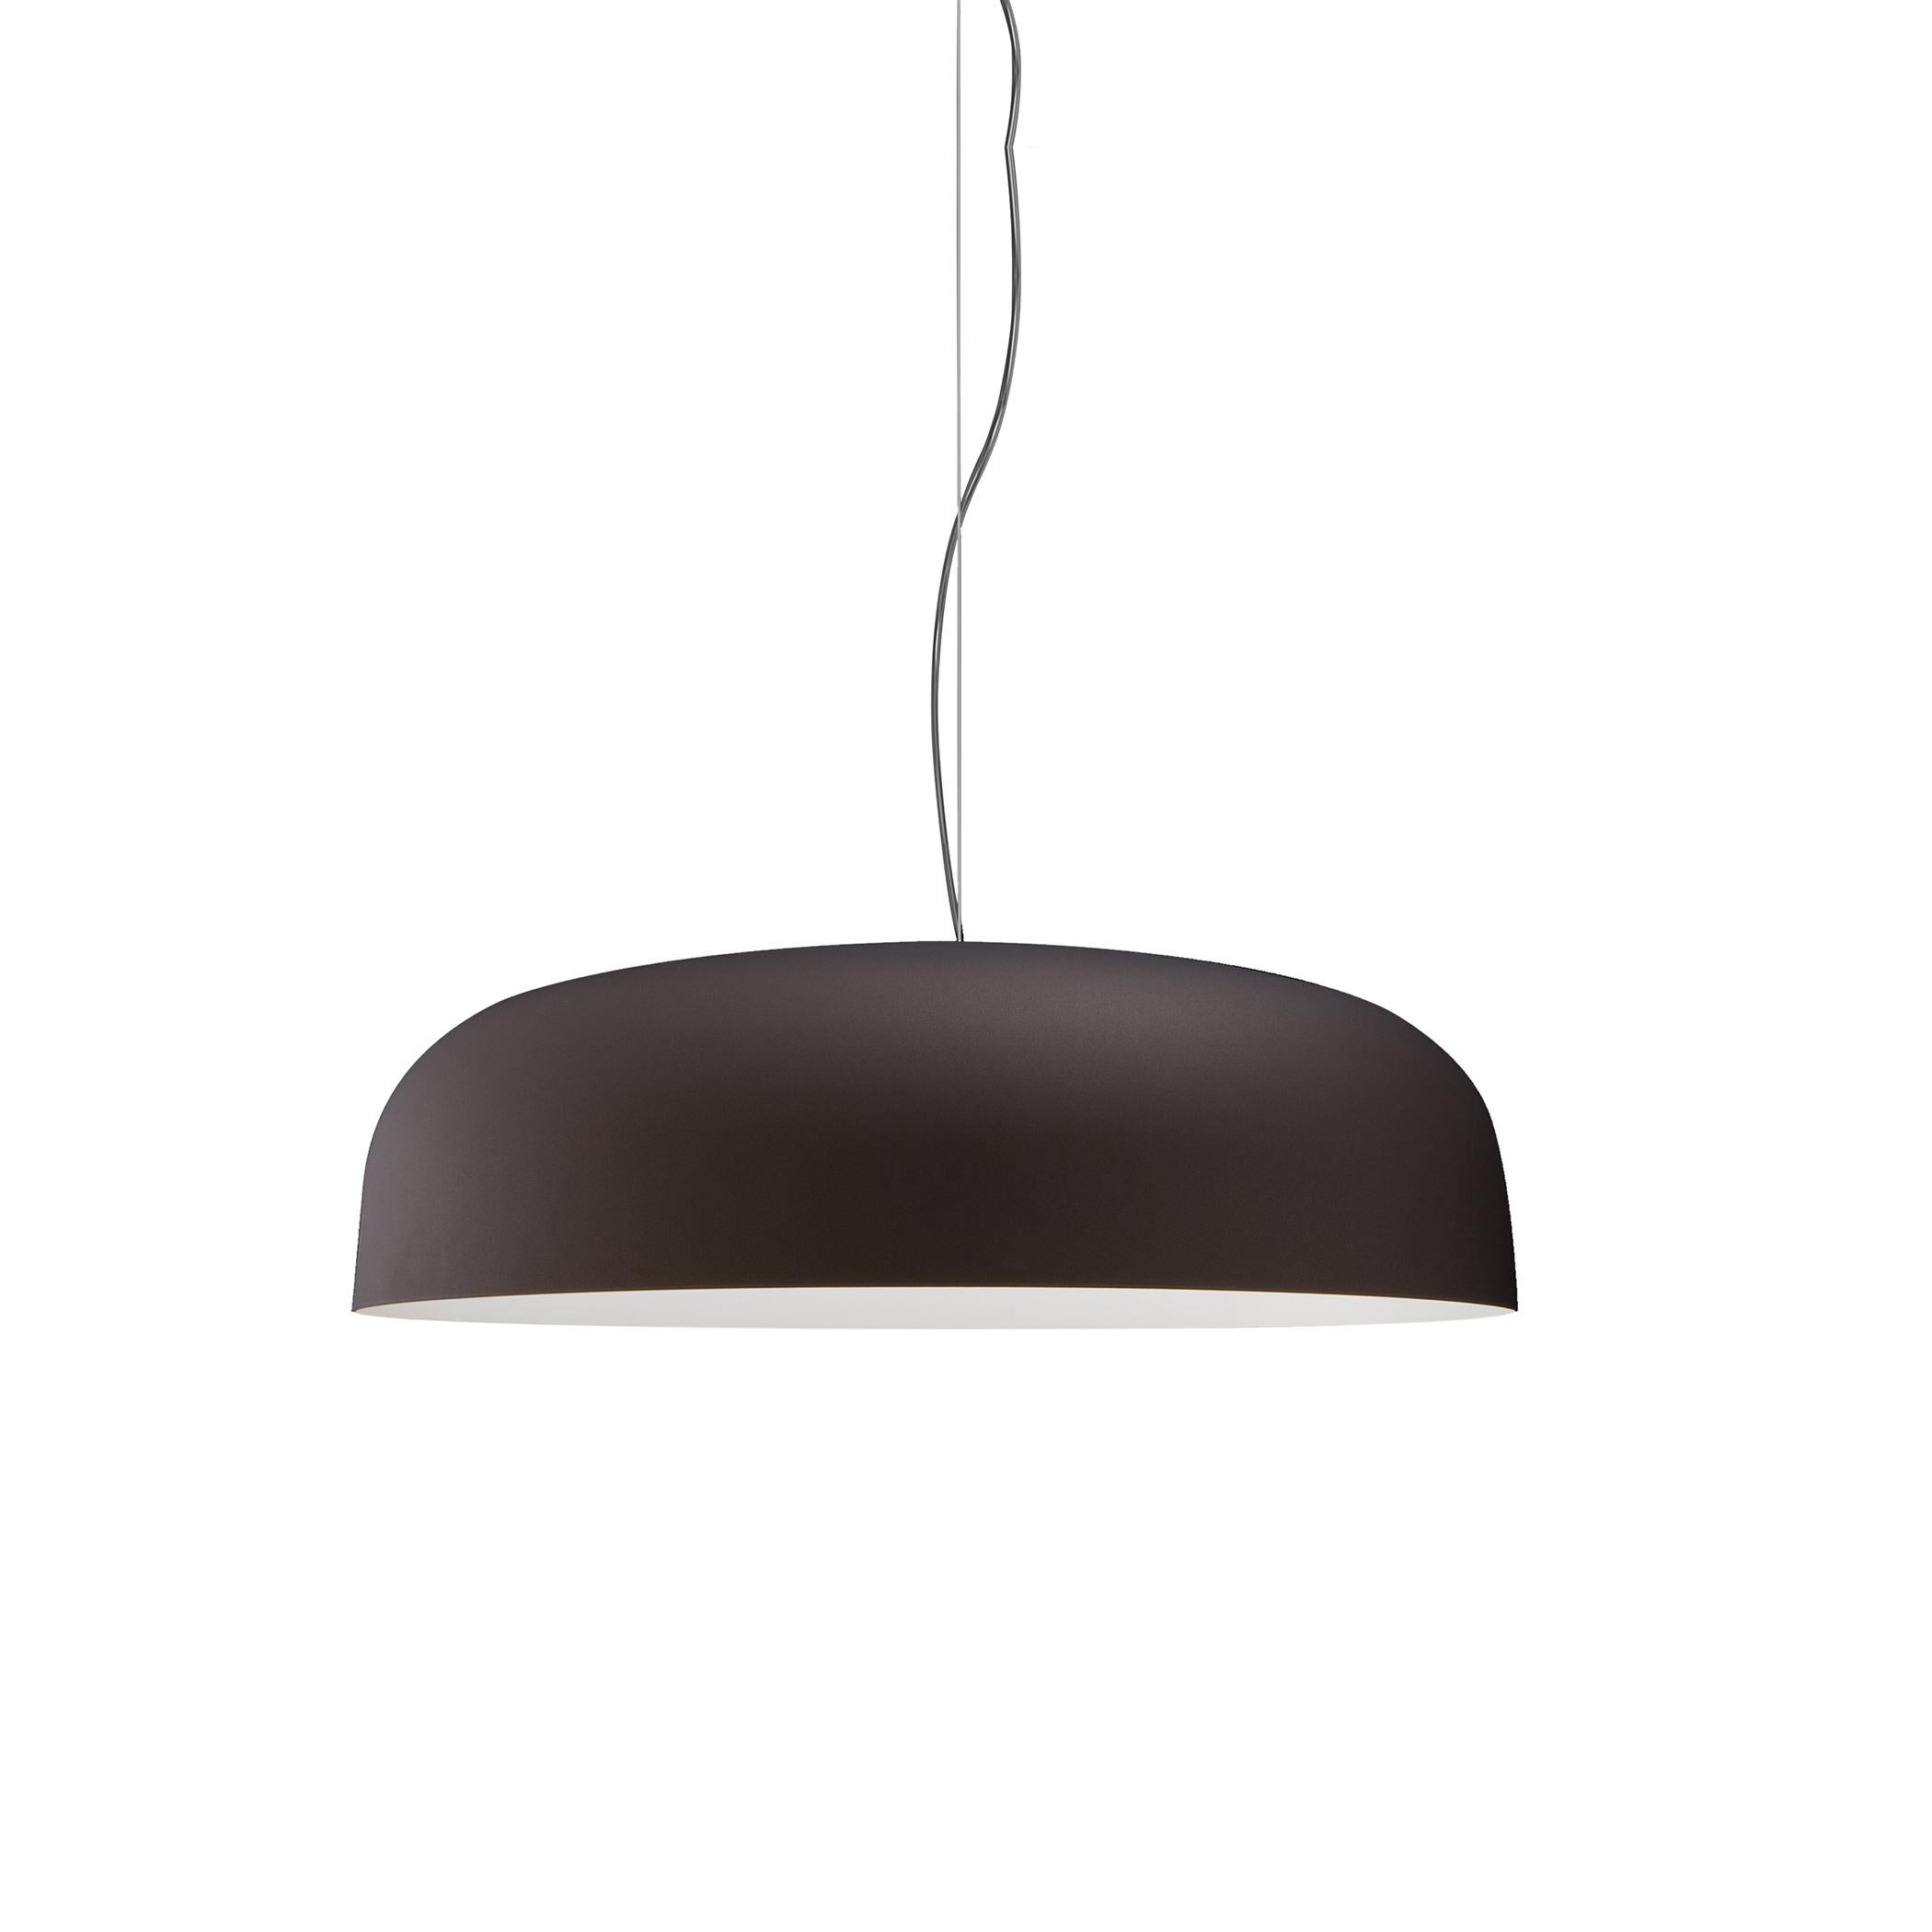 Suspension lamp 'Canopy' 421 designed by Francesco Rota in 2010.
Suspension lamp giving indirect fluorescent light. Reflector and lampshade screen in lacquered metal white, or two-colors. Manufactured by Oluce, Italy.

Canopy owes both its shape